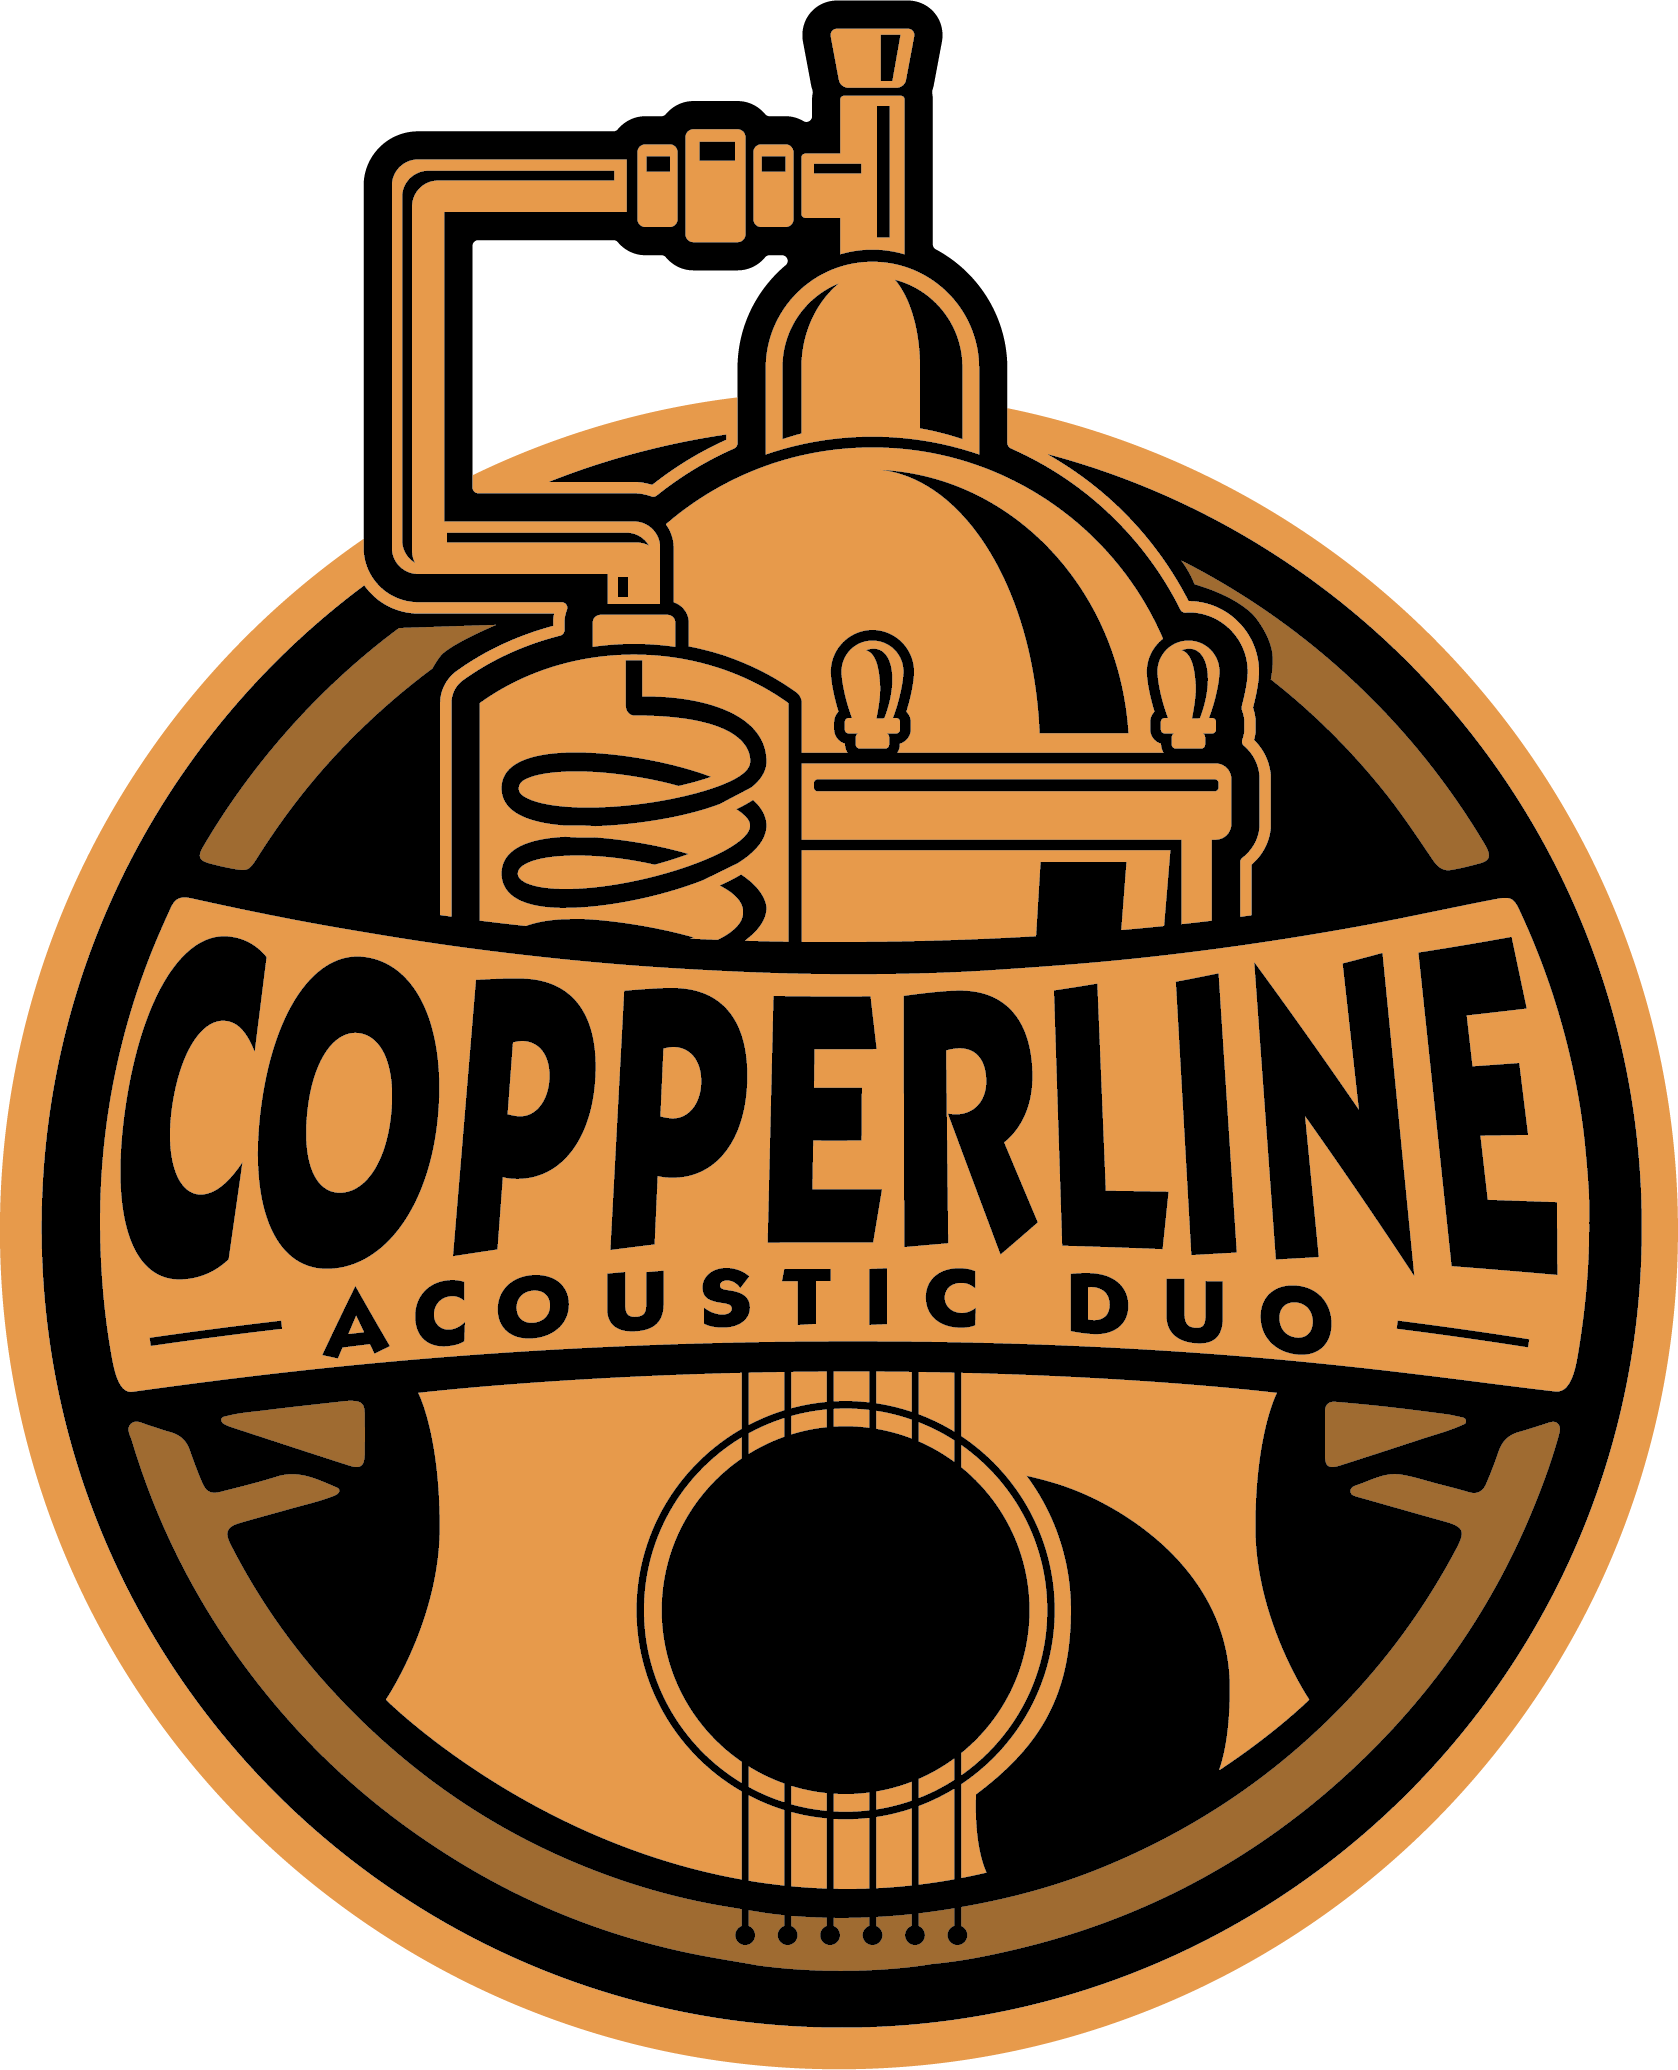 “Copperline” Live at The Moncton Dart Club